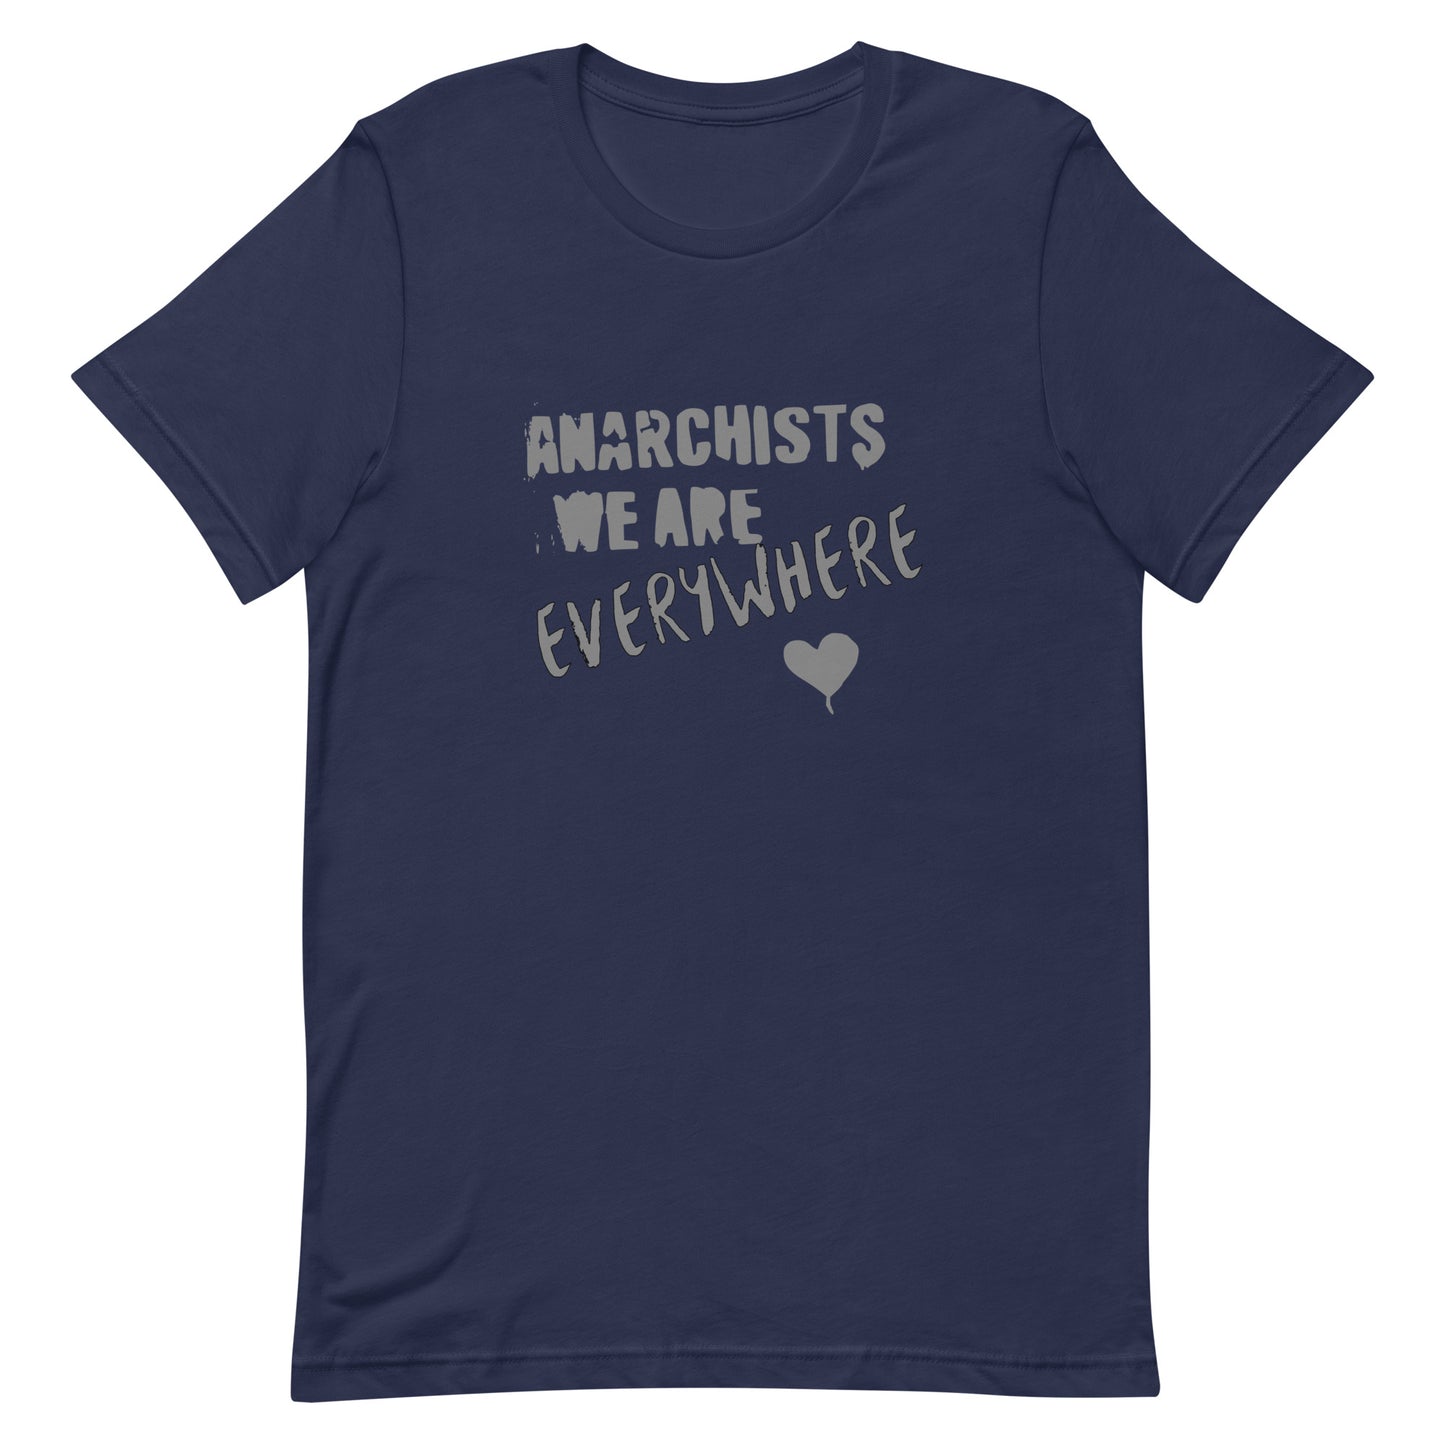 Anarchy Wear "We Are Every Where" Agora Grey Unisex t-shirt